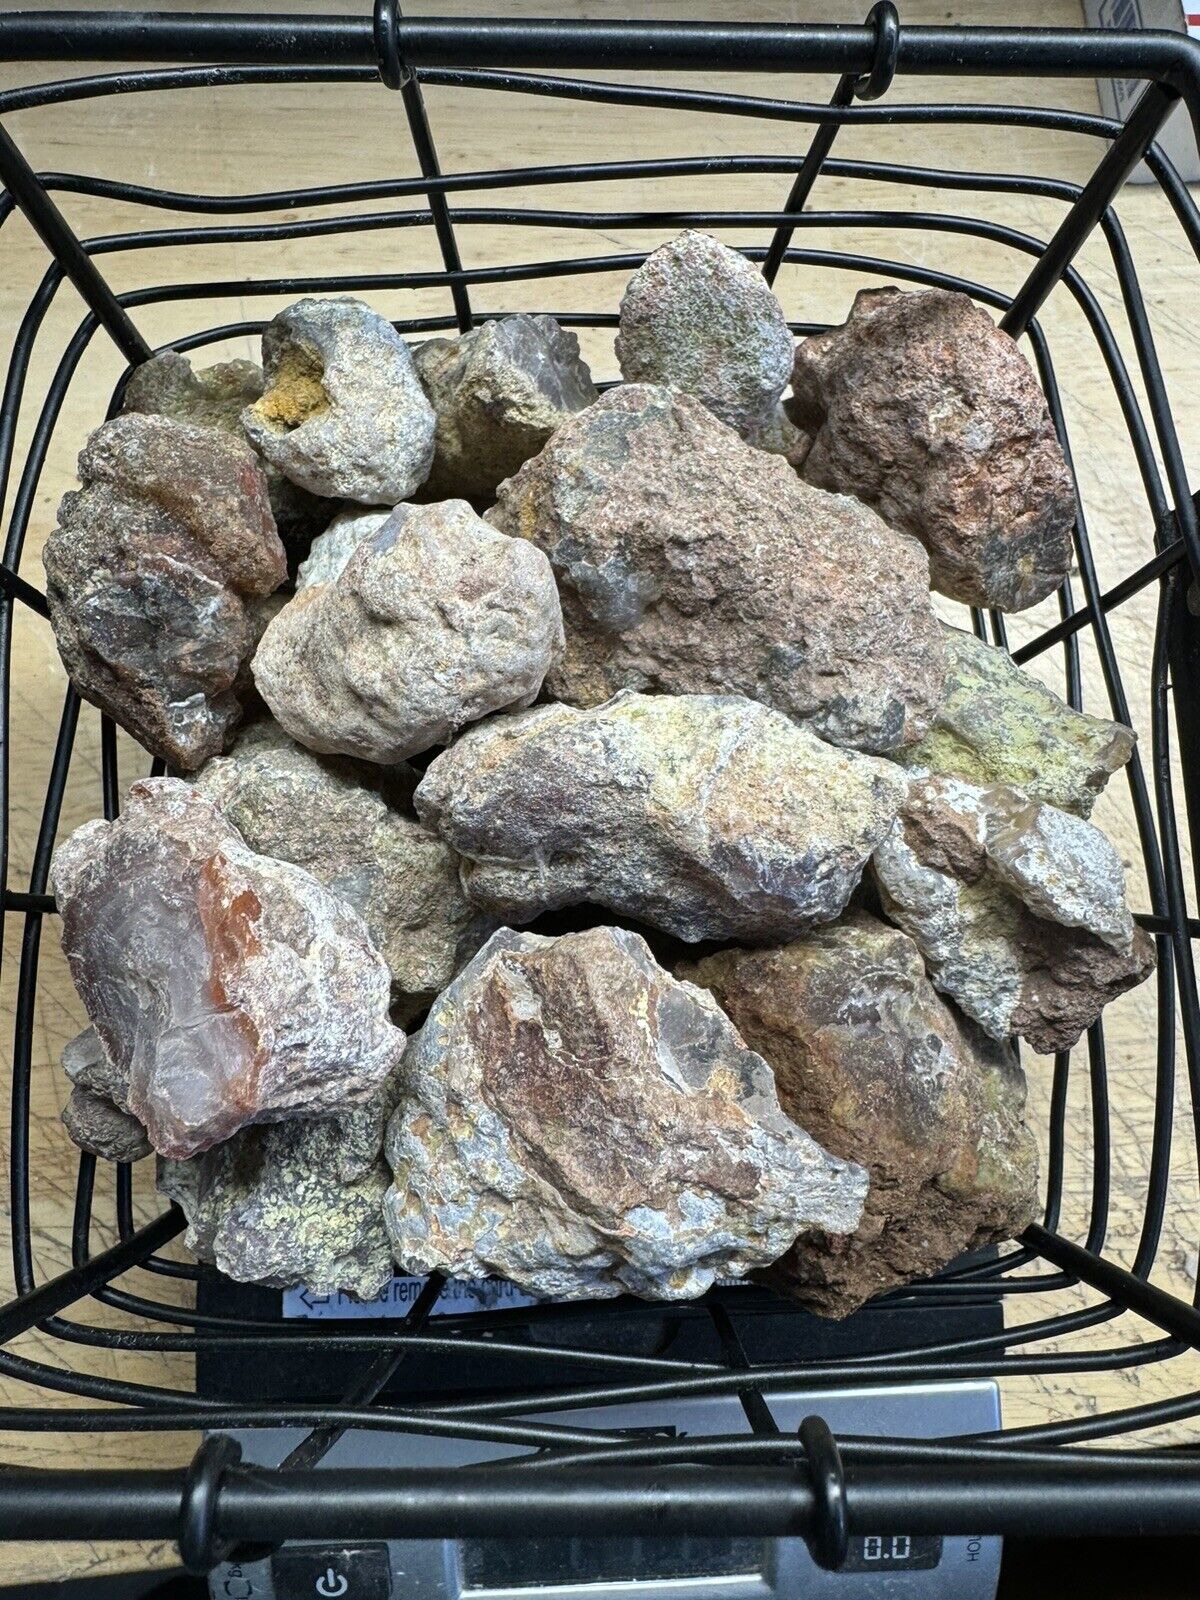 5 Lbs Uncut Laguna Agate Nodules Hand Selected For Specimens Or Cabbing